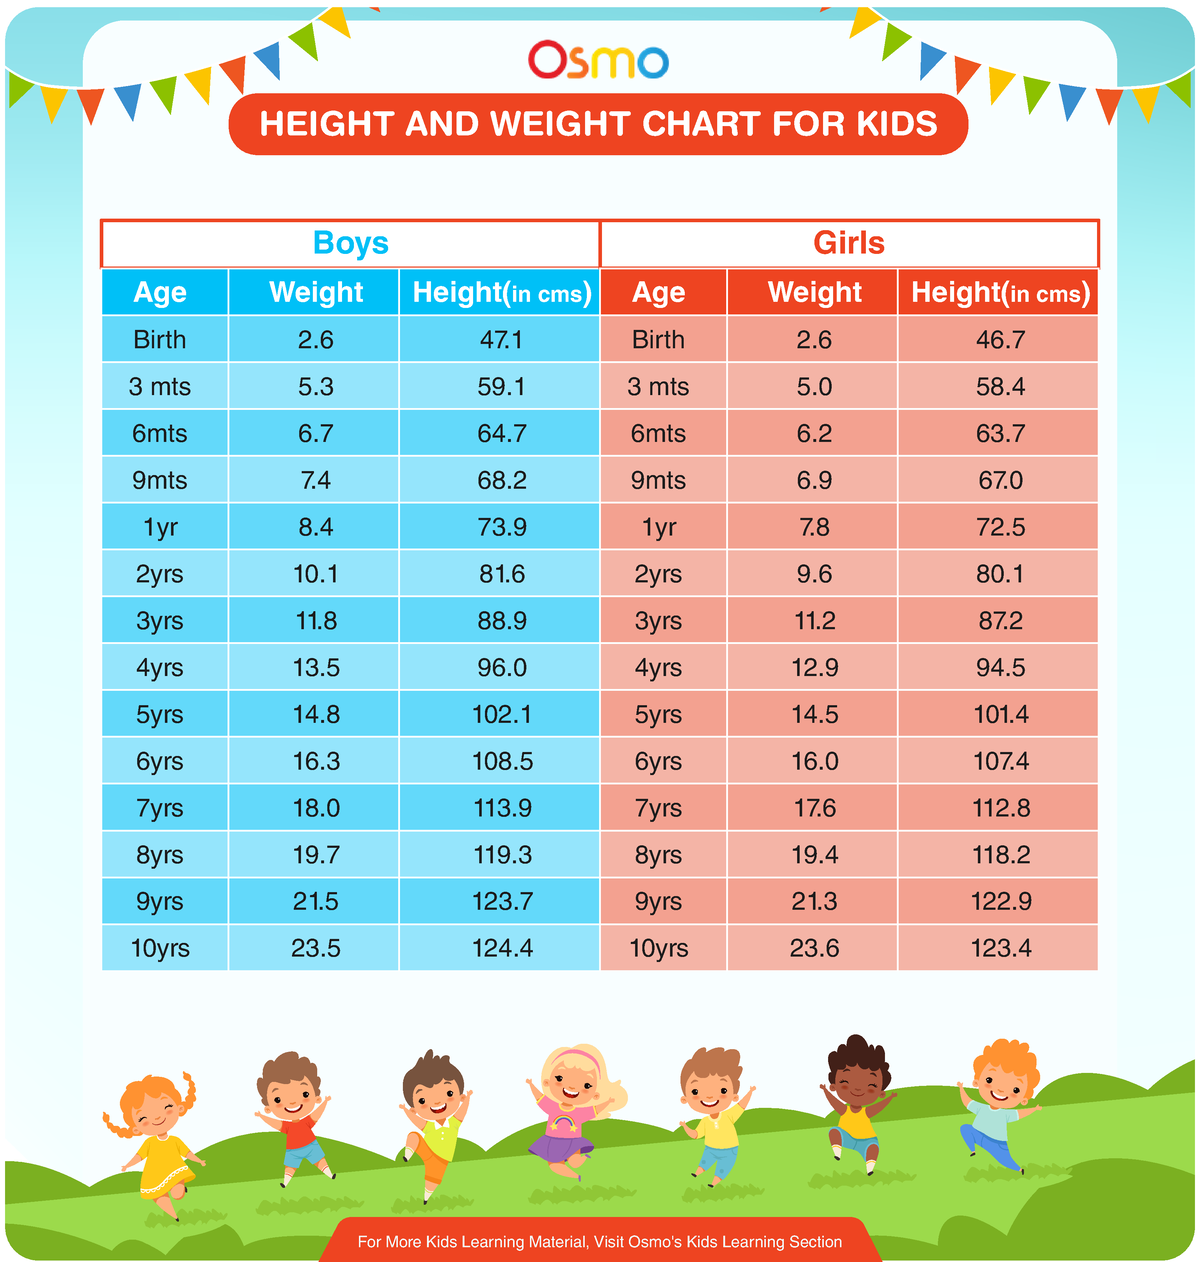 Height And Weight Chart For Kids - HEIGHT AND WEIGHT CHART FOR KIDS